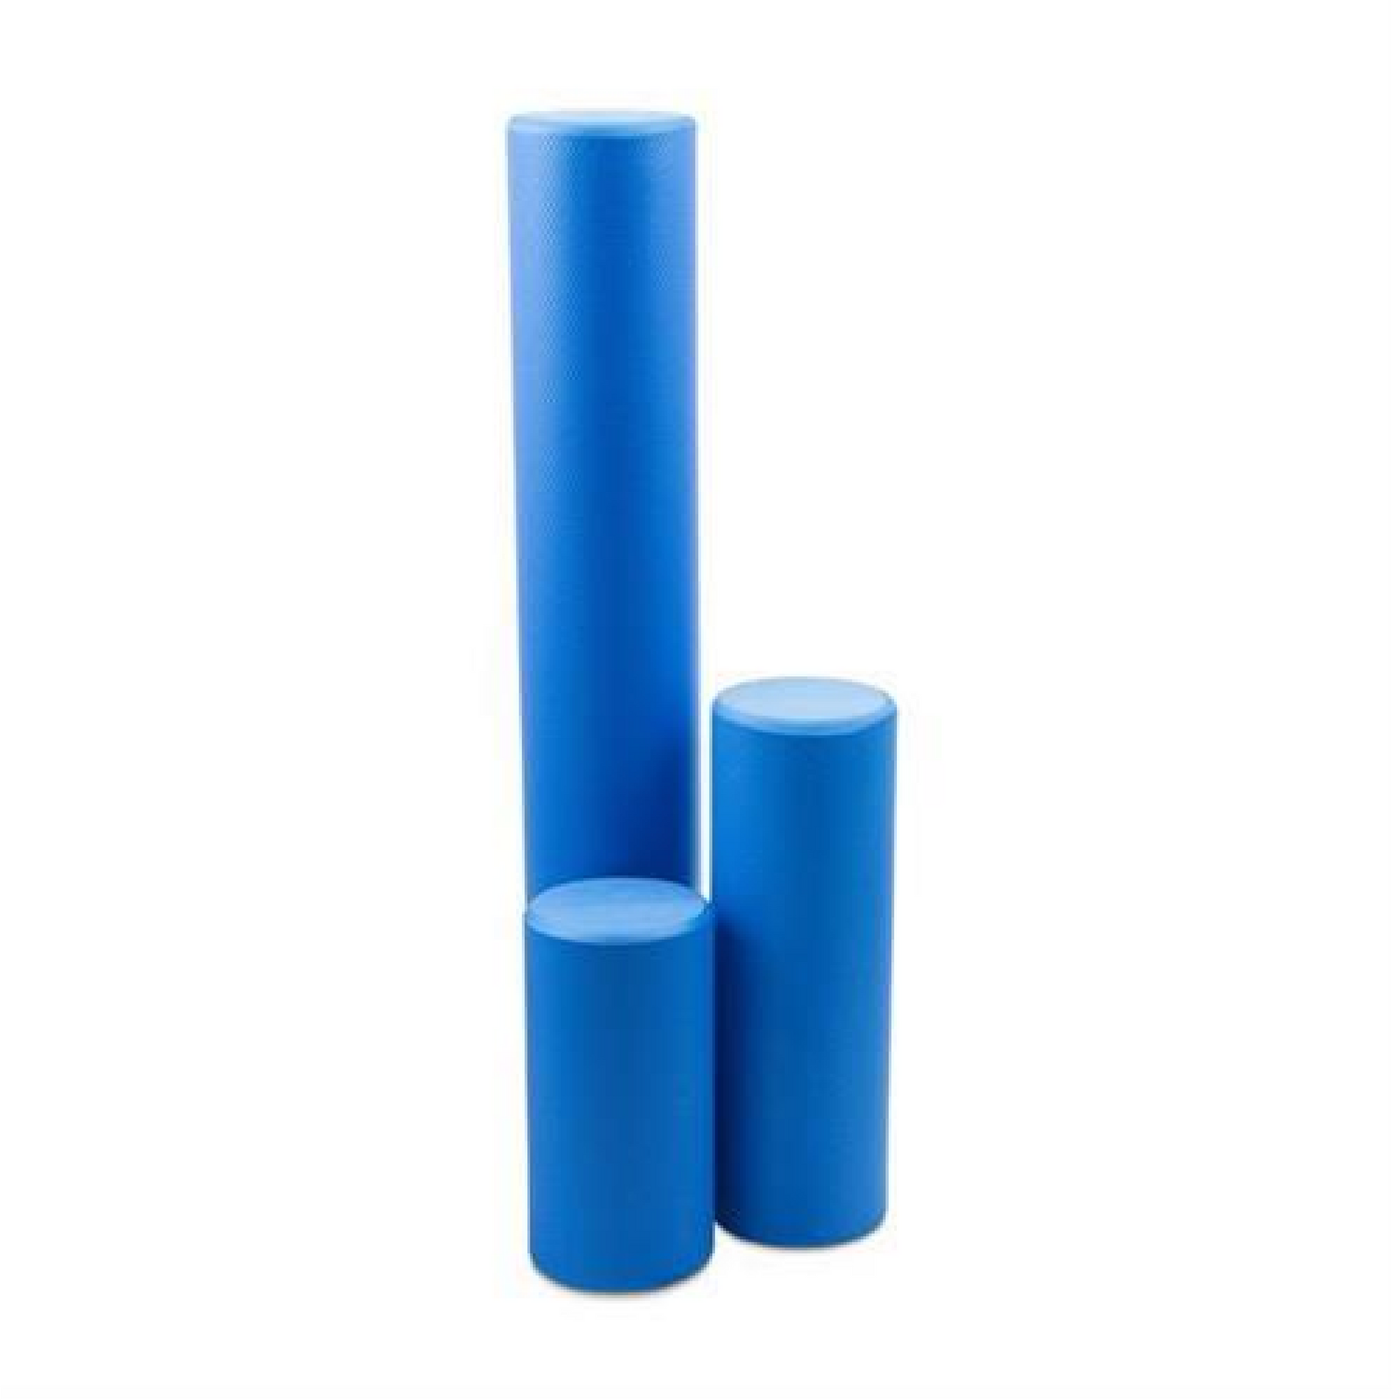 Foam rollers 3 sizes displayed